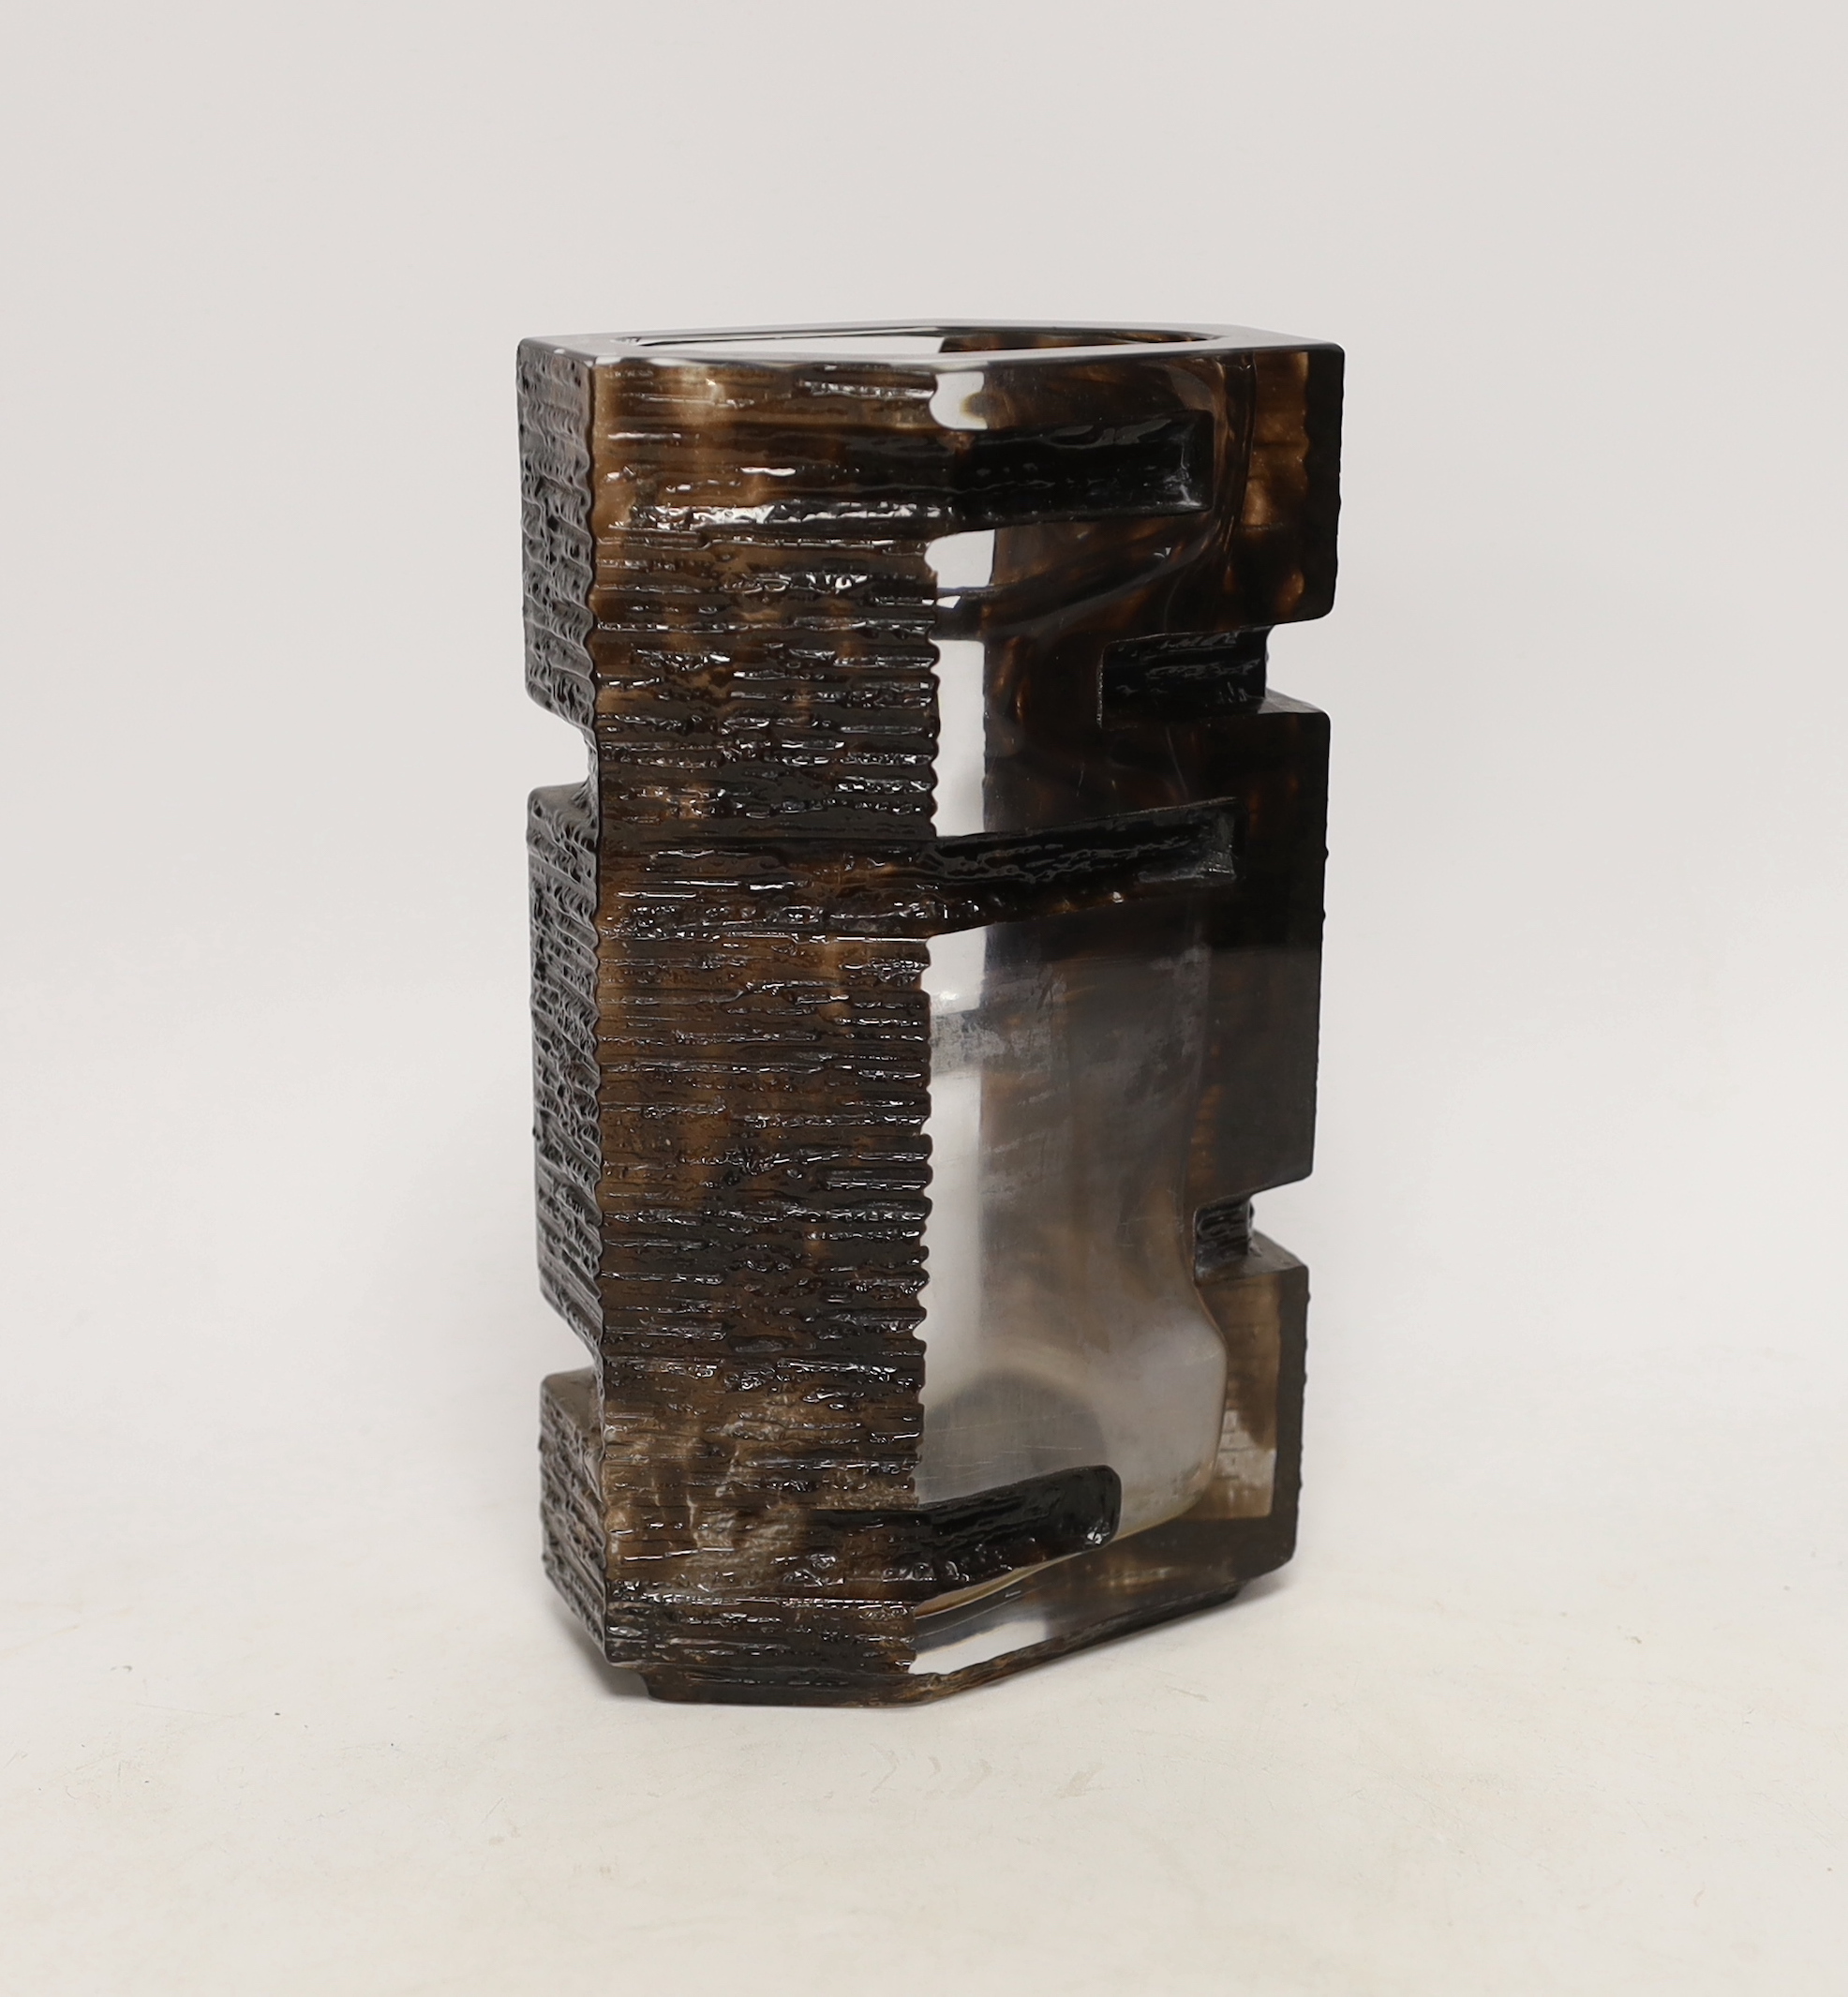 A brutalist style Daum glass vase by Cesar Baldaccini, with etched signature, Daum France, 22cm high